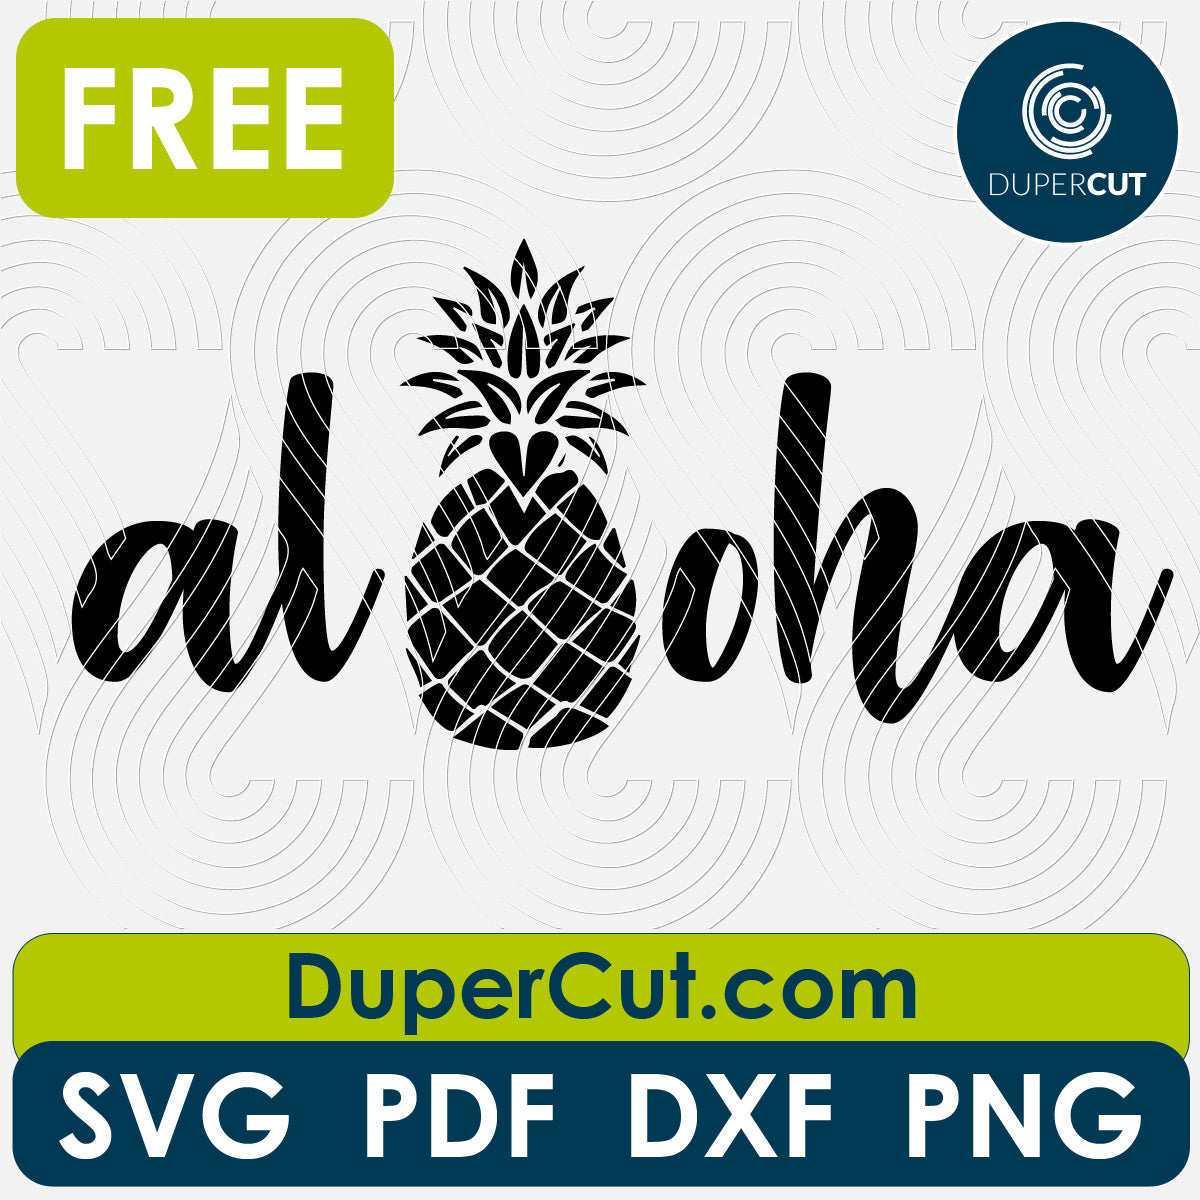 Aloha pineapple - free cutting files SVG DXF vector template for laser cutting and engraving. For Glowforge, Cricut, Silhouette, scroll saw, cnc plasma machines by DuperCut